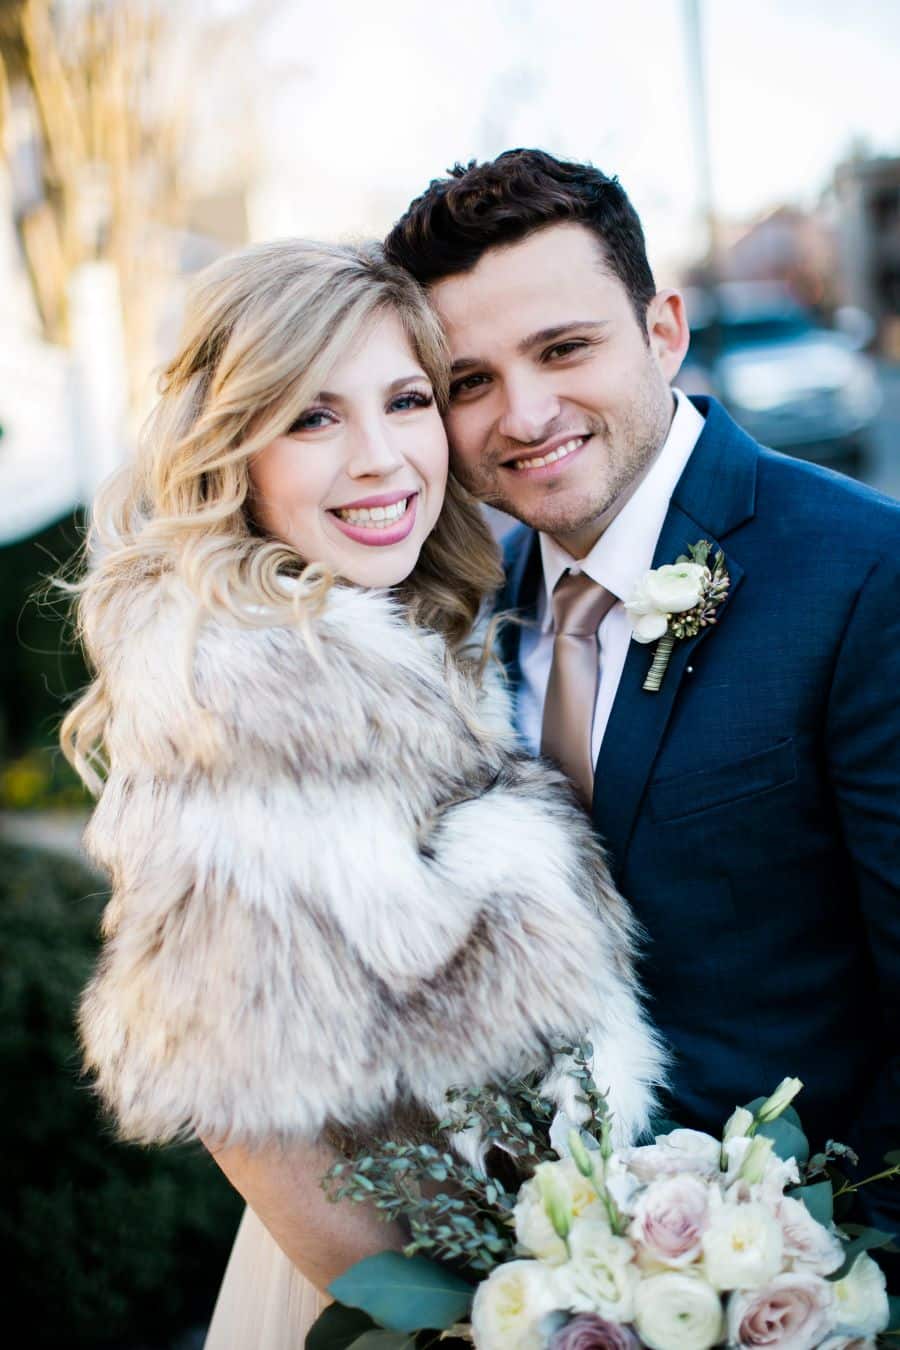 Bride wearing fur caplet and smiling with groom / Elopement / Spring / March / Dusty Rose